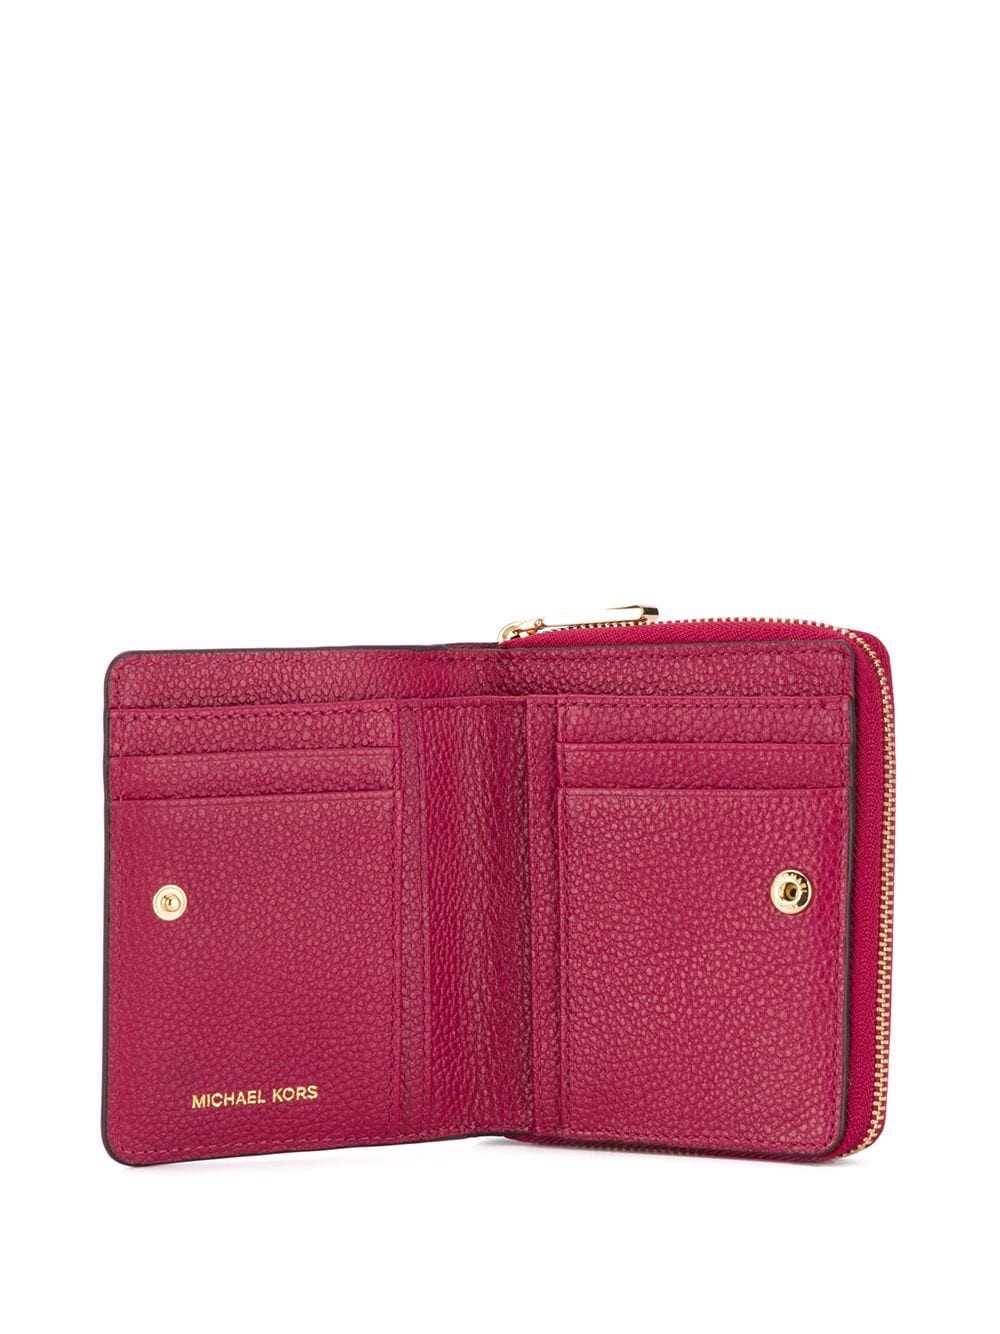 michael kors mk SNAP WALLET available on montiboutique.com - 31843